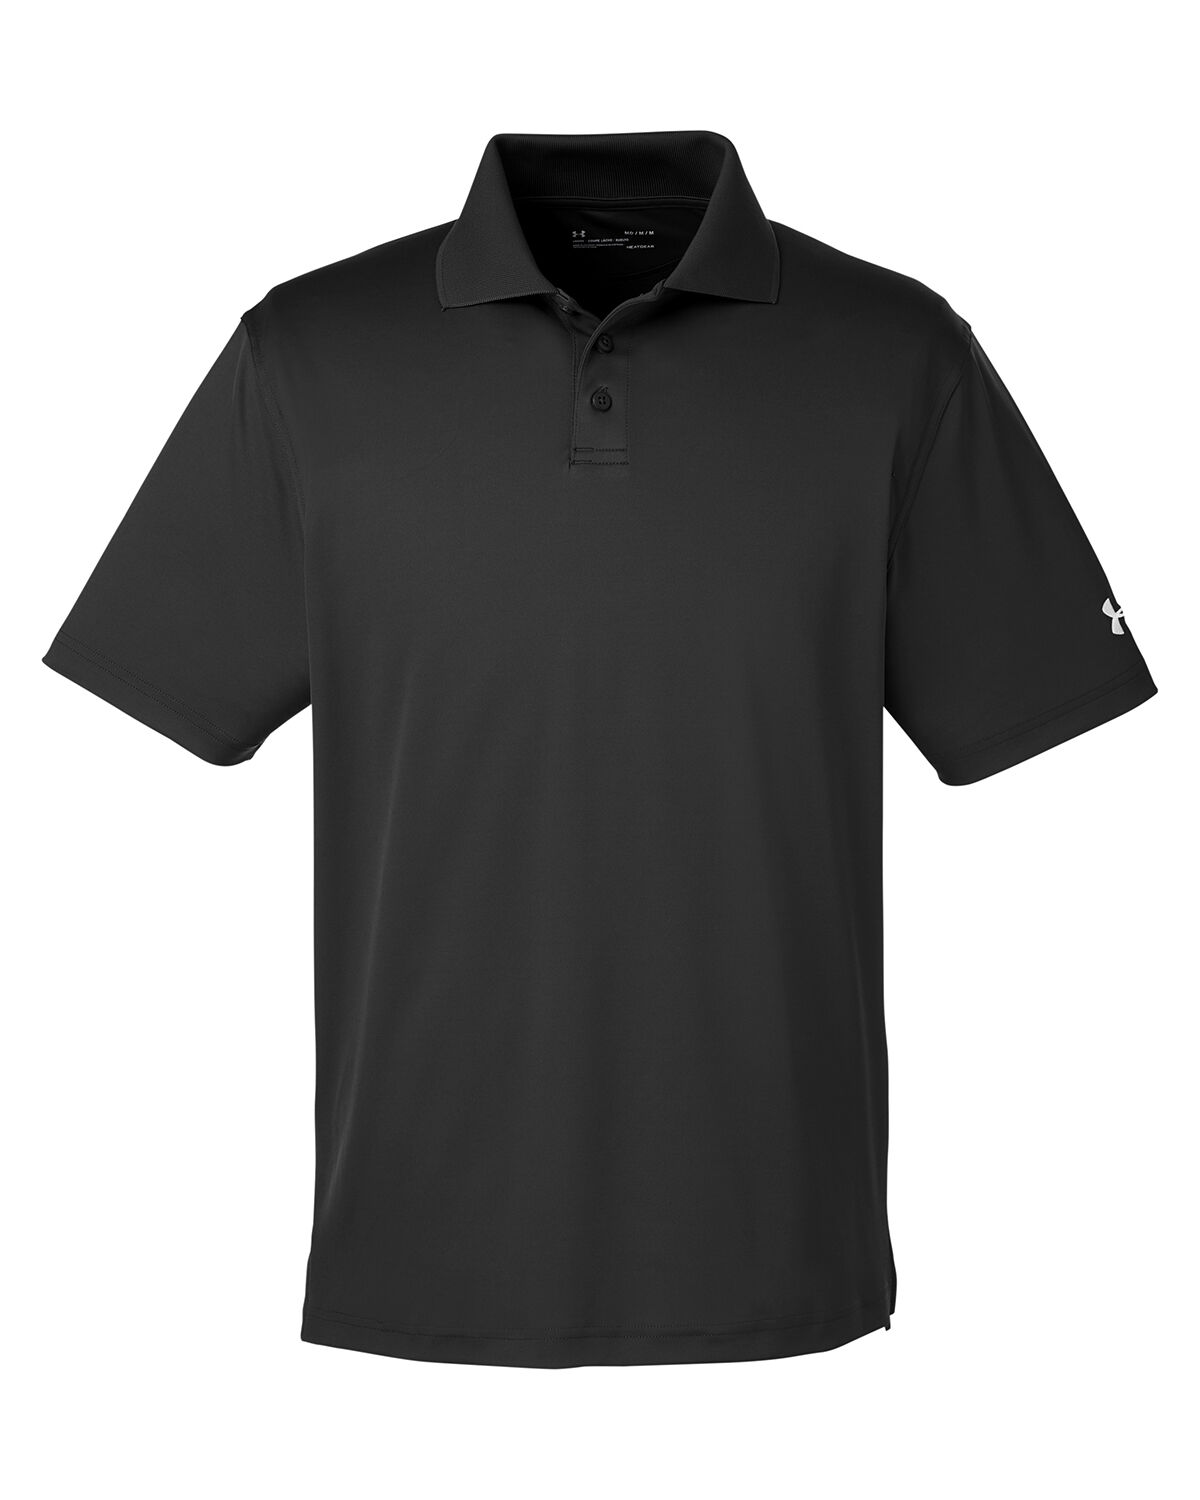 Branded Under Armour Men’s Corp Performance Polo Black